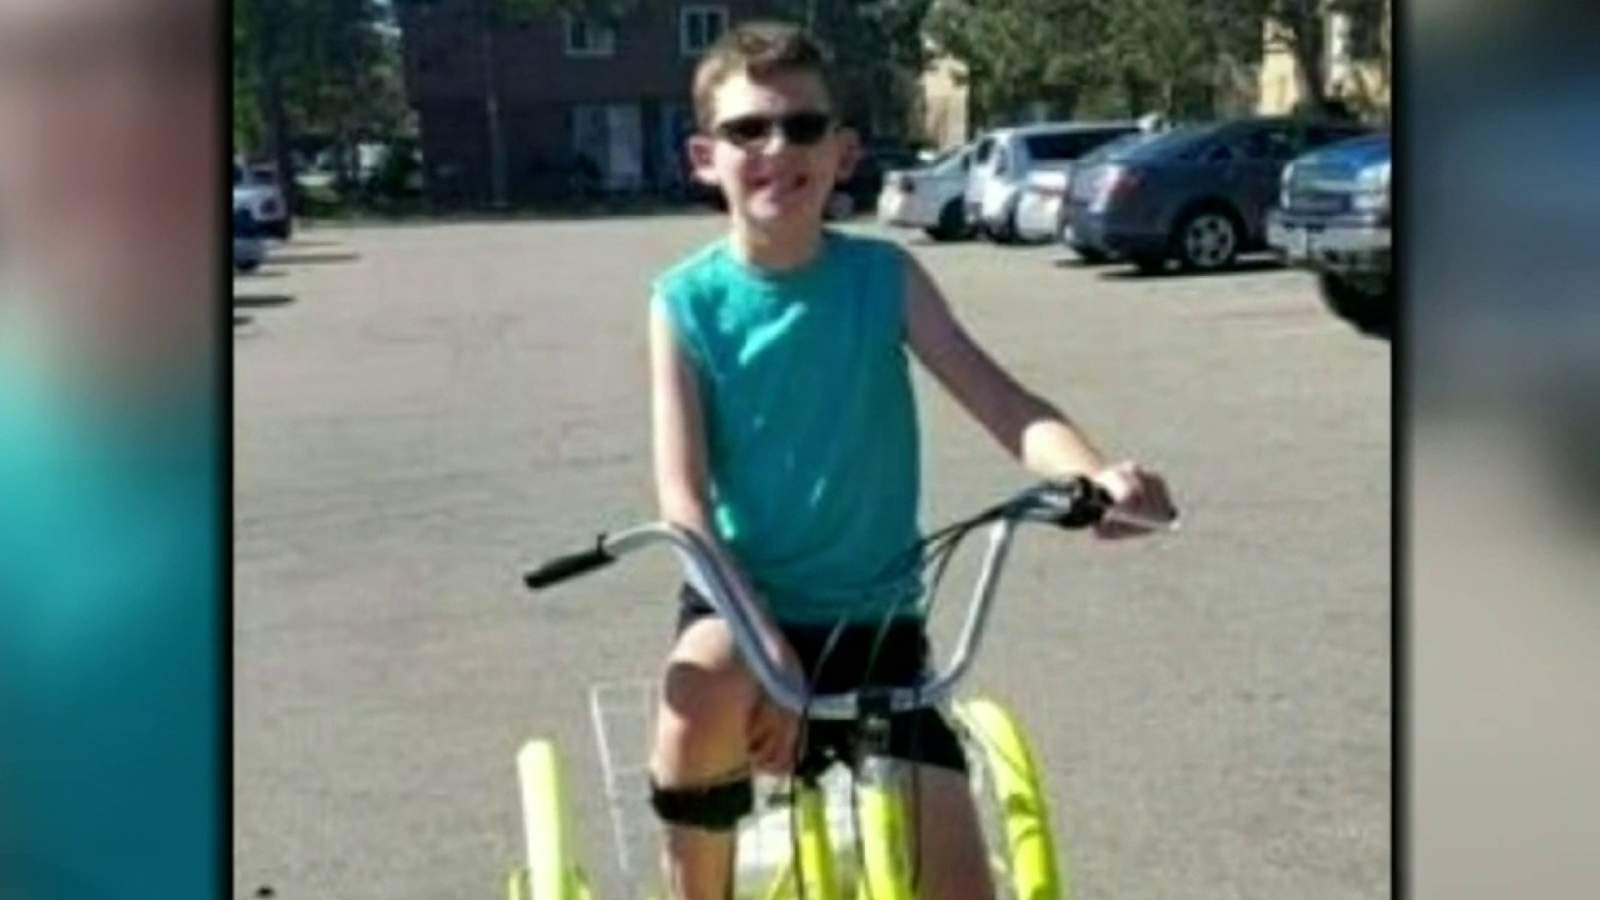 Bike built for boy with cerebral palsy stolen from Shelby Township home